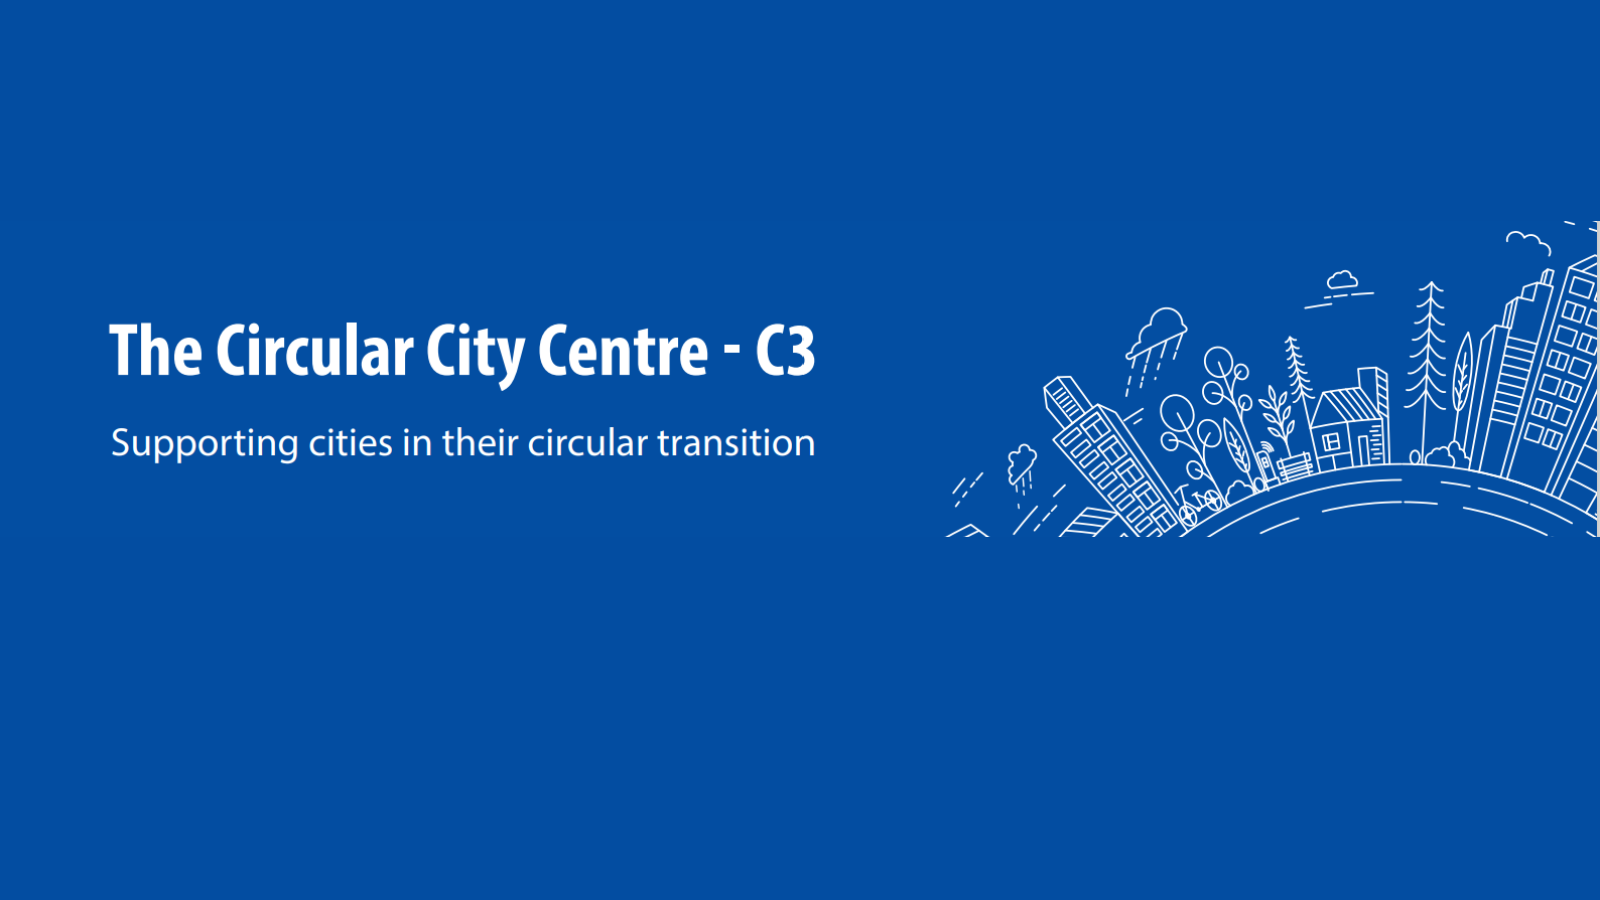 EIB's Circular City Centre (C3) initiative continues: support to thrive circular transition in cities